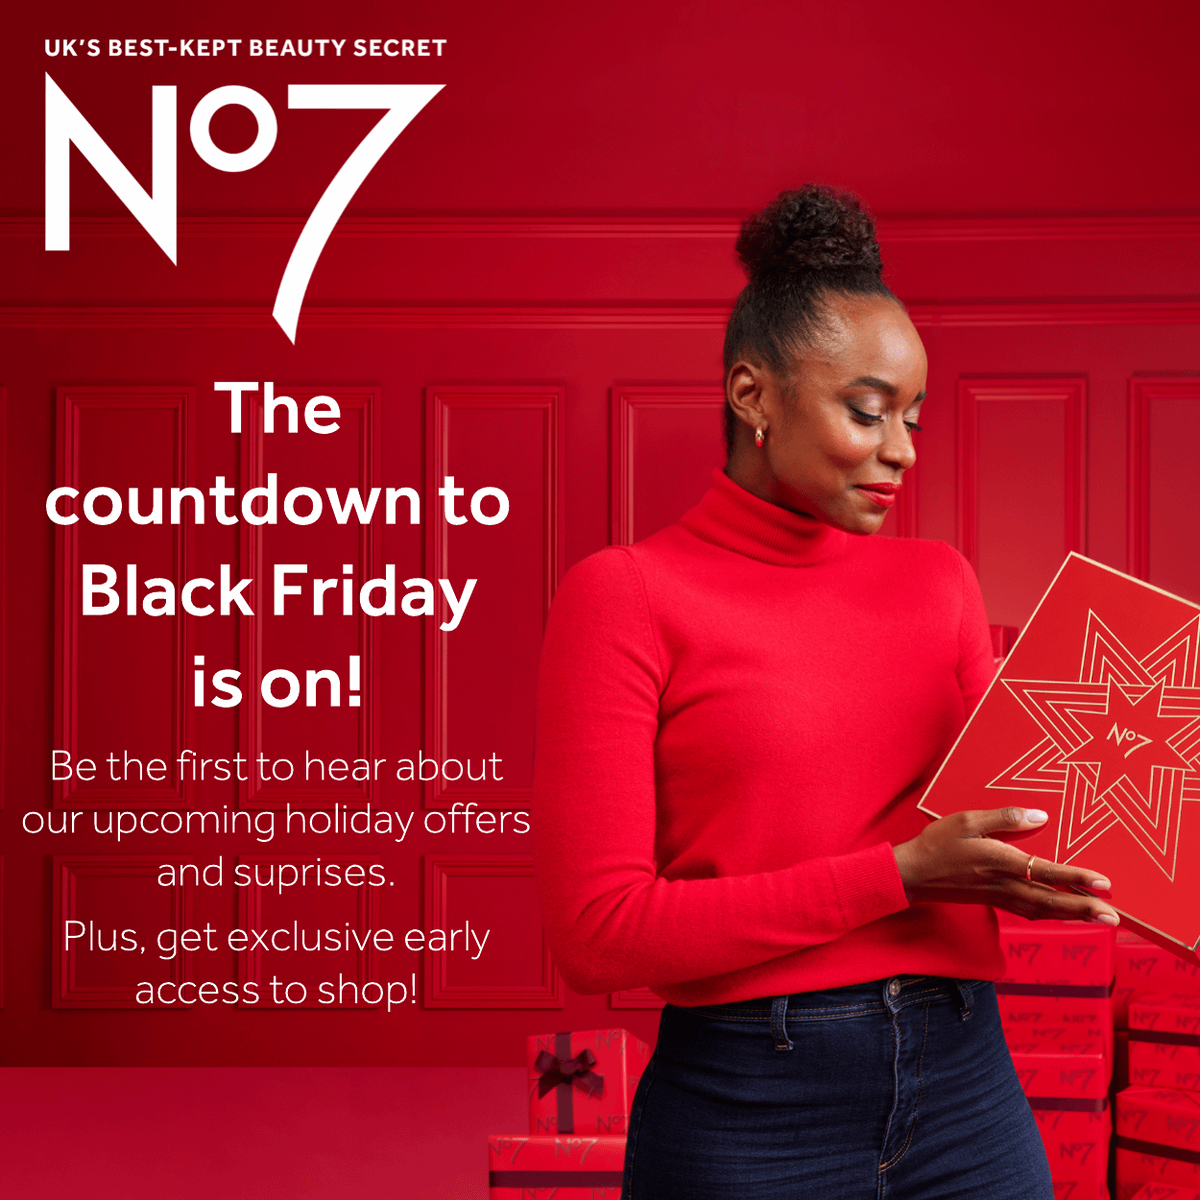 The countdown to Black Friday is on! Be the first to hear about our upcoming holiday beauty offers and surprises. Plus, get exclusive early access to shop!